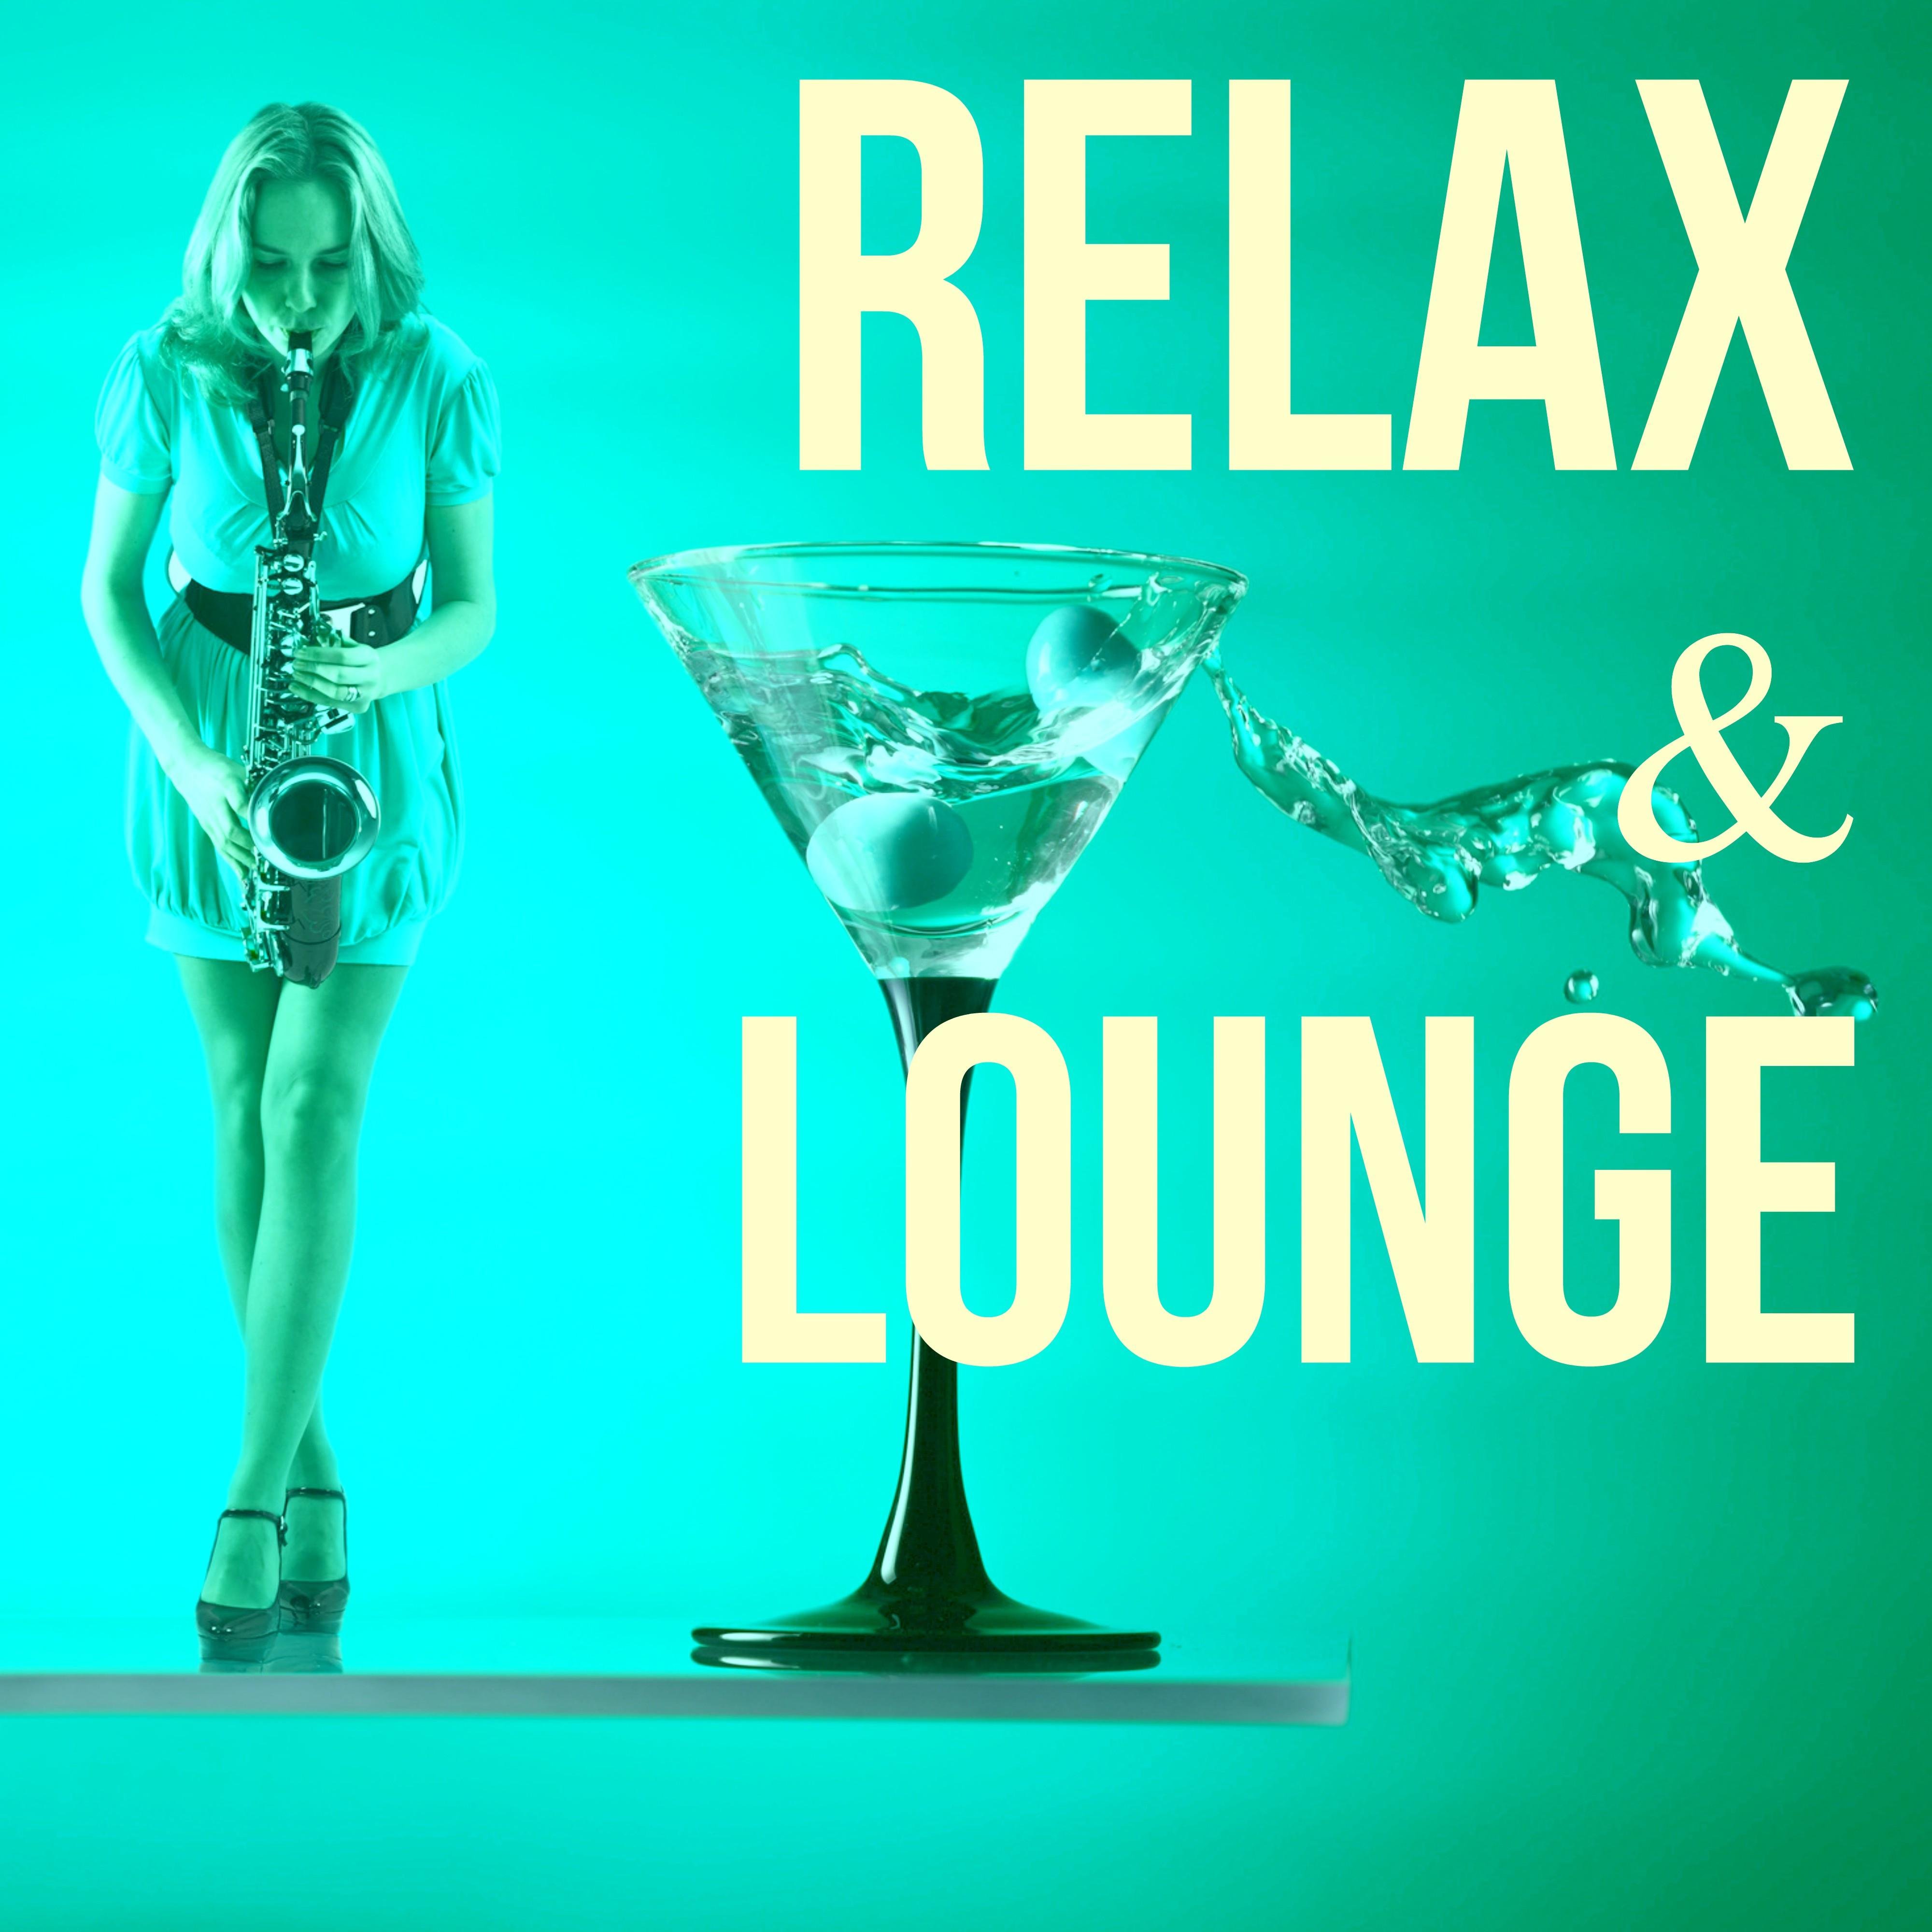 Relax & Lounge - Lounge Bar Songs Background to Relax and Drink